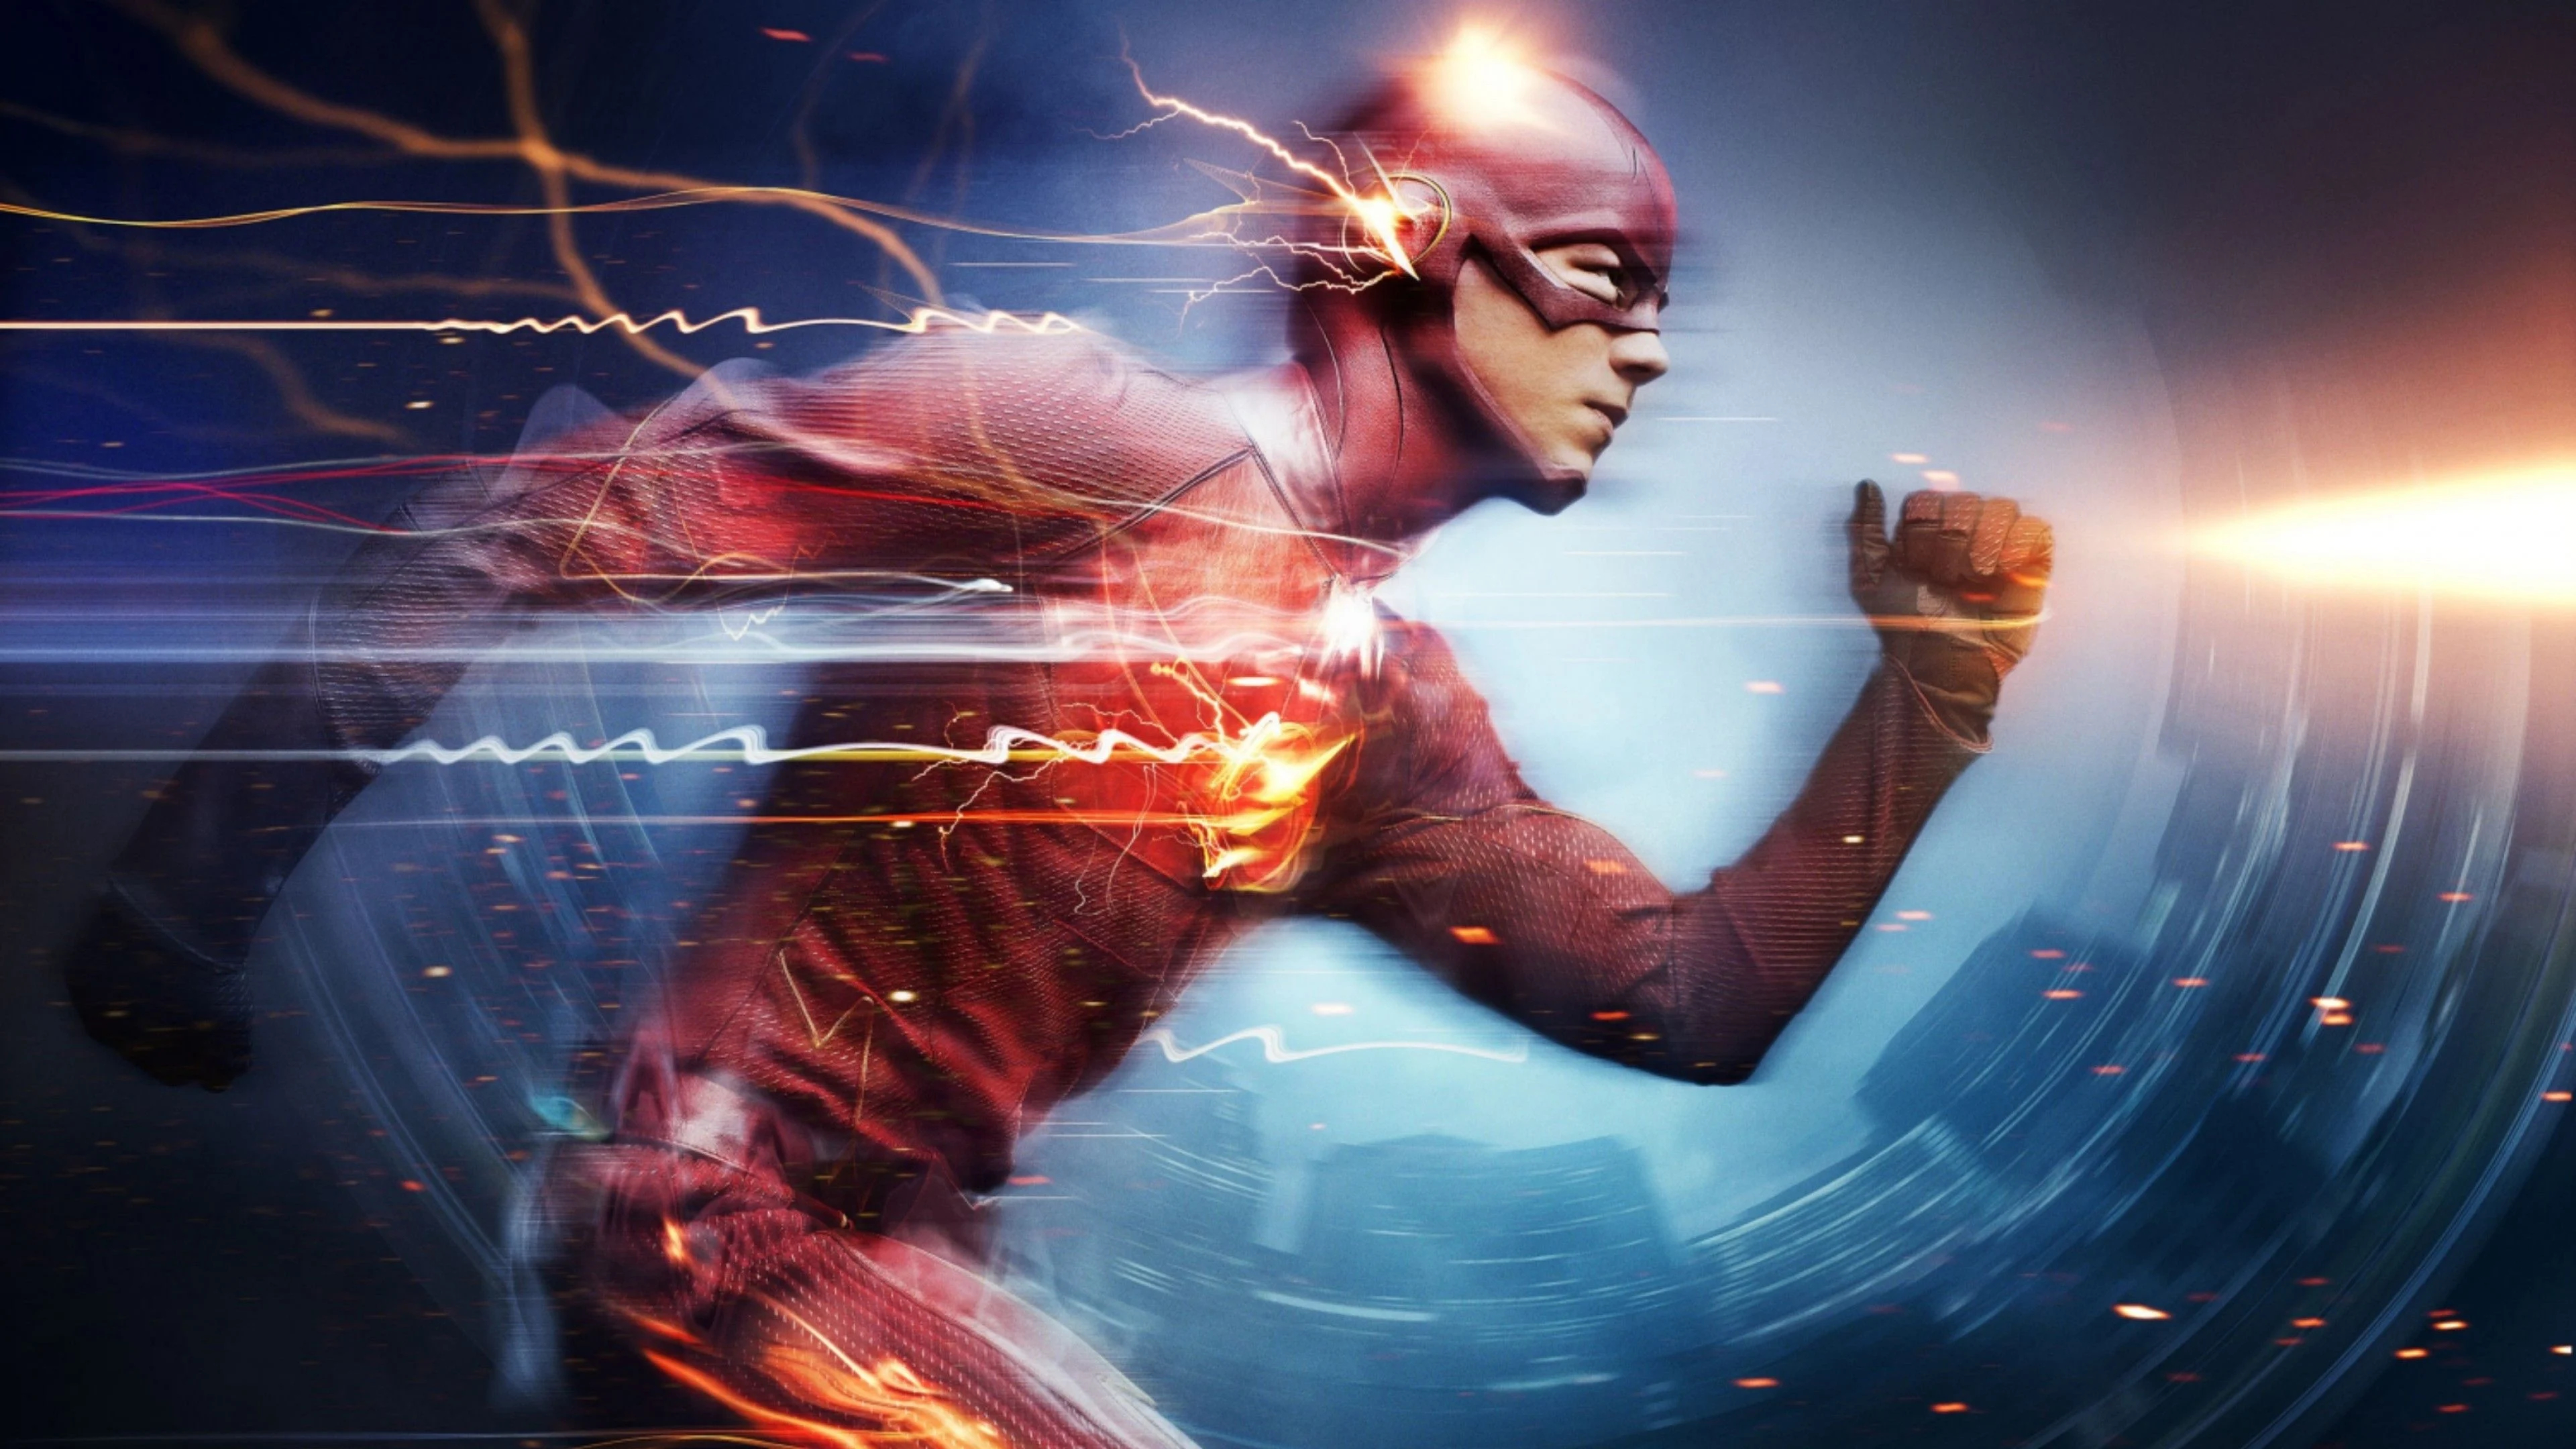 3840x2160 The Flash 4K Movie Wallpapers Top Free The Flash 4K Movie Backgrounds